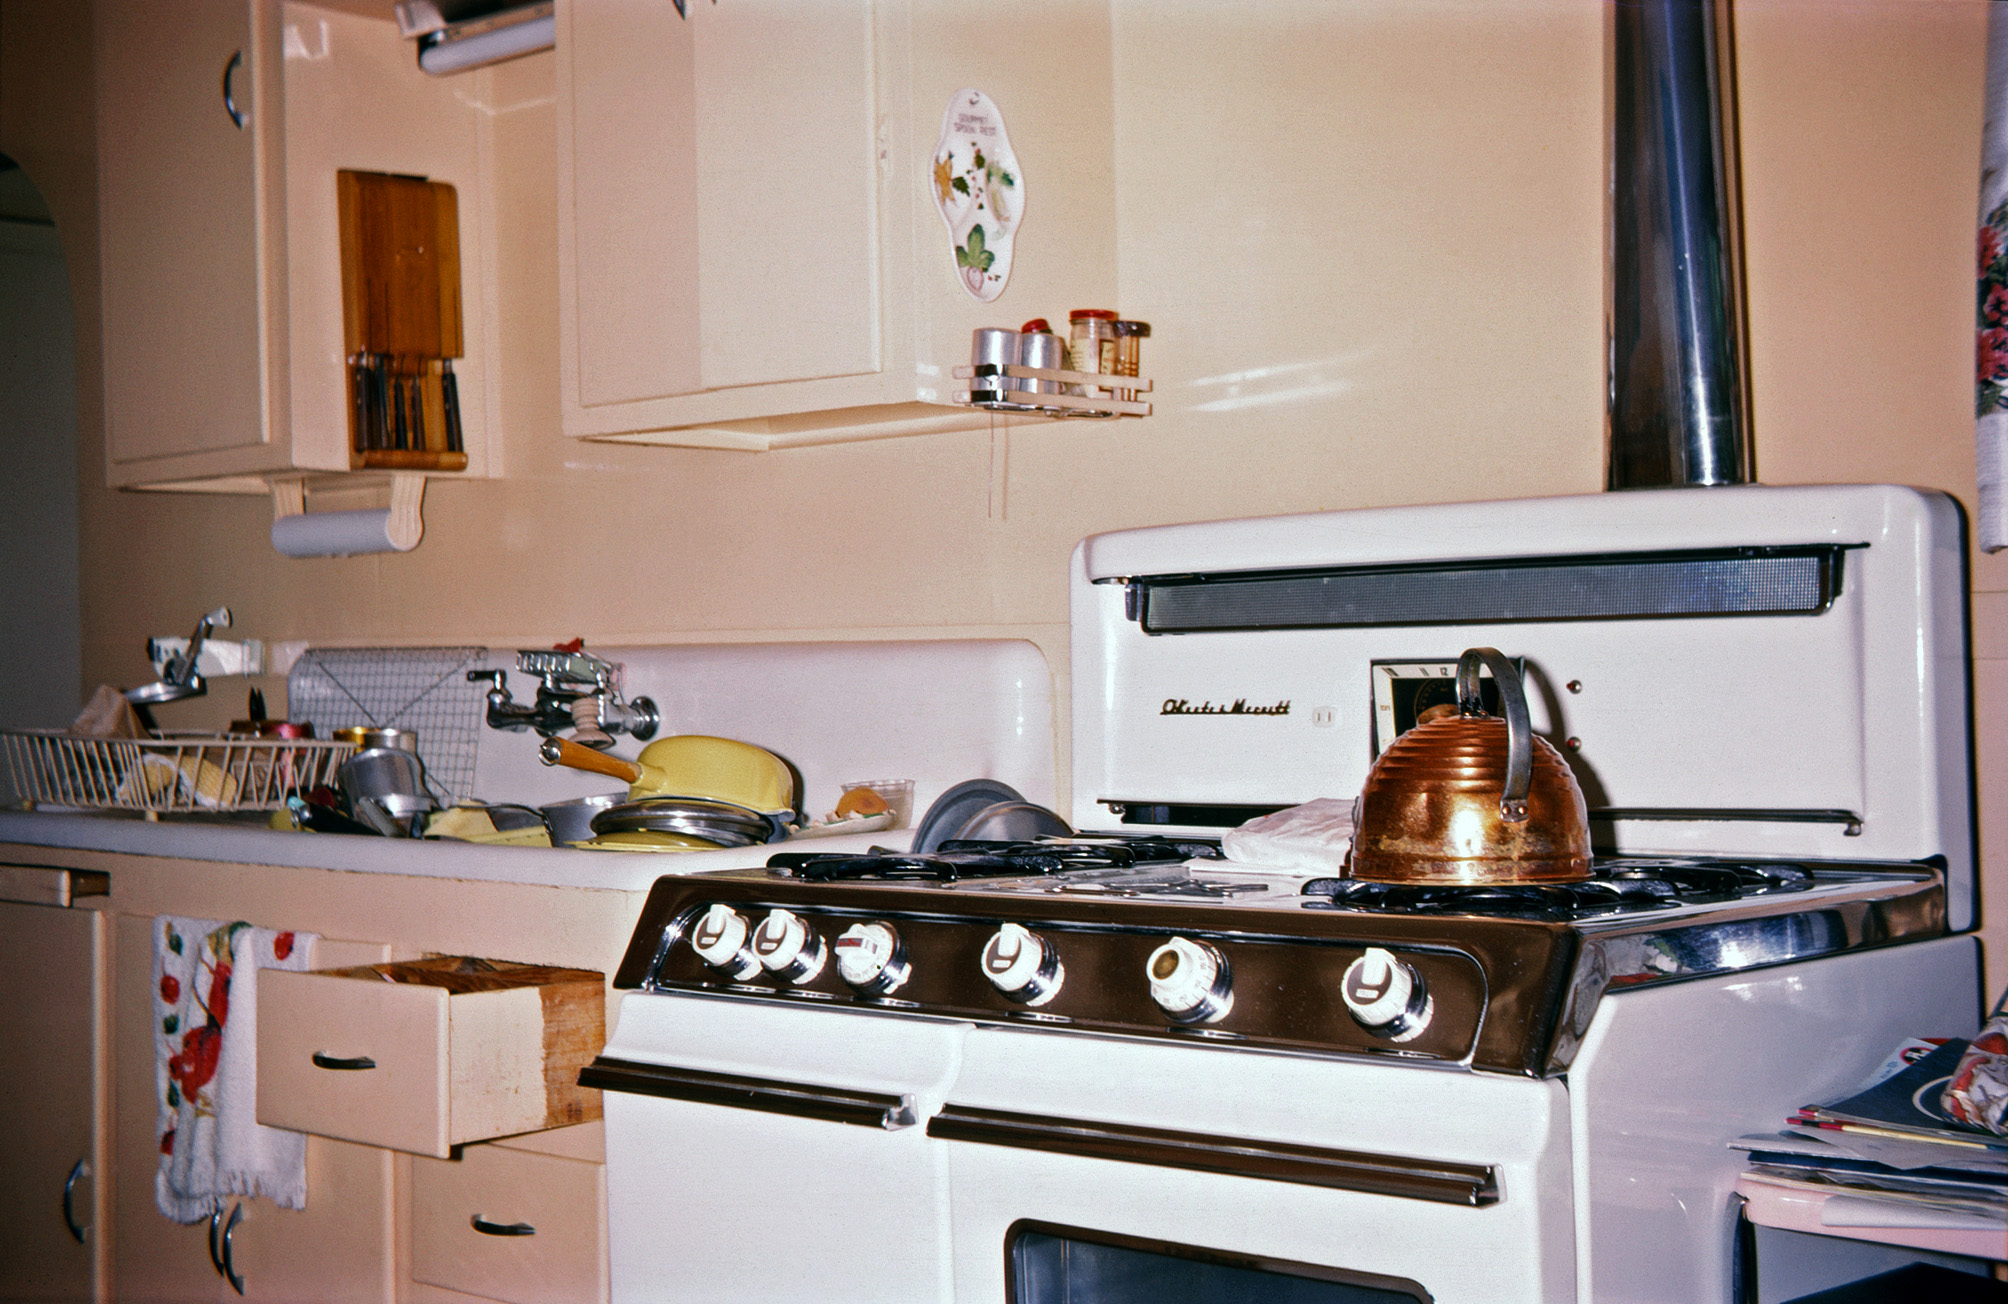 Unless you happened to live in one of those fancy kitchen decor ads like you see over on Plan59.com, your 1964 kitchen might be like ours, a mixture of stuff from the 50s (1955 O'Keefe & Merritt gas range), 40s (sink, cabinets & fixtures from a 1946 remodel) and even the 30s (the copper tea kettle). A package of meat is defrosting on the griddle, which was always a little warm from its pilot light. My Kodachrome slide. View full size.